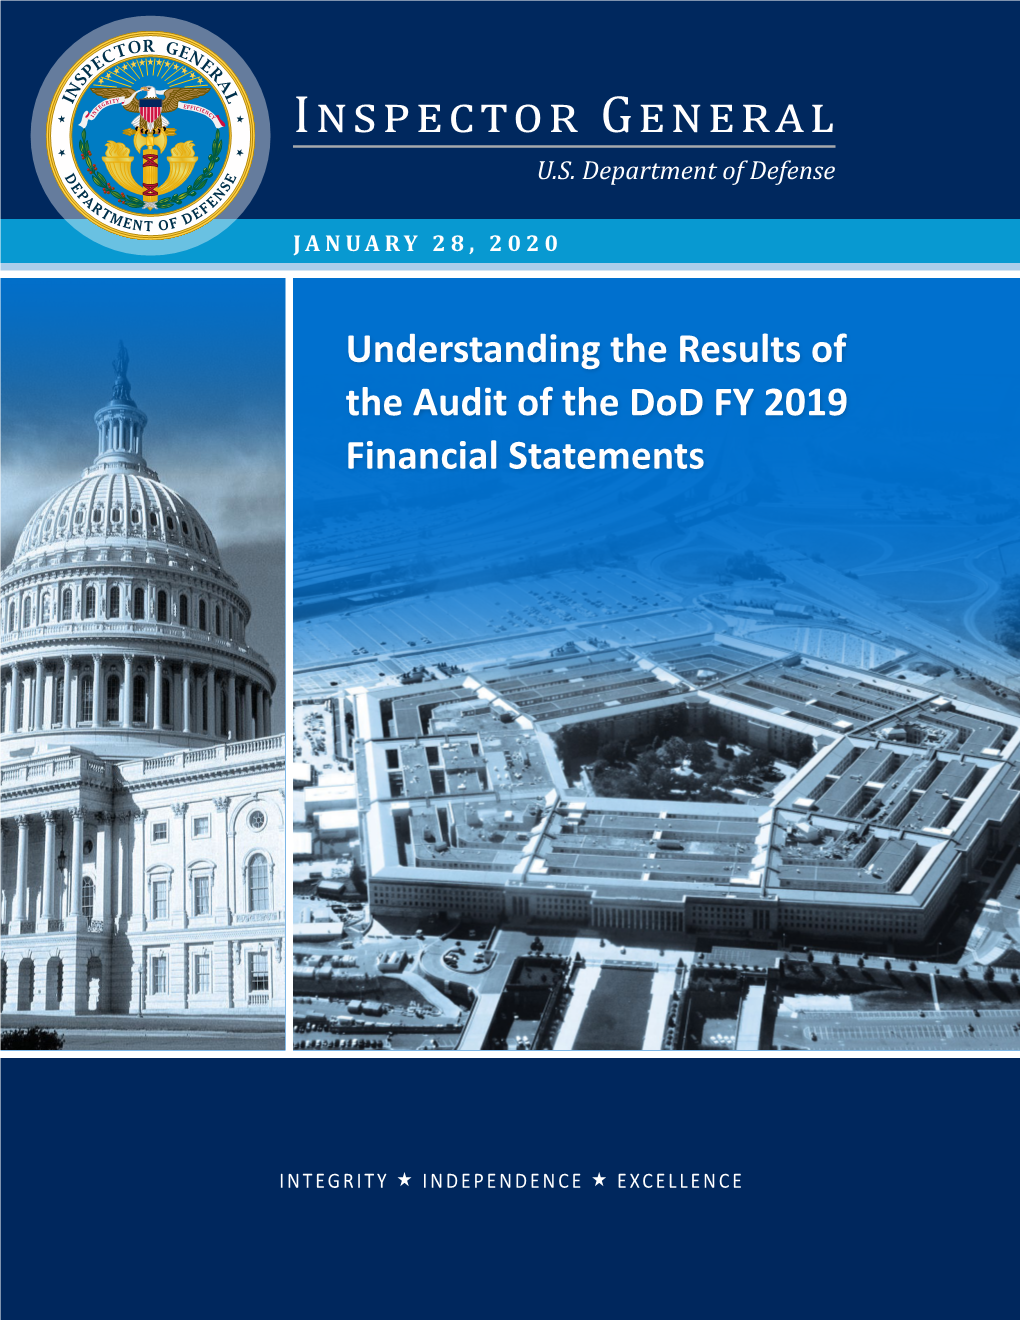 Understanding the Results of the Audit of the Dod FY 2019 Financial Statements